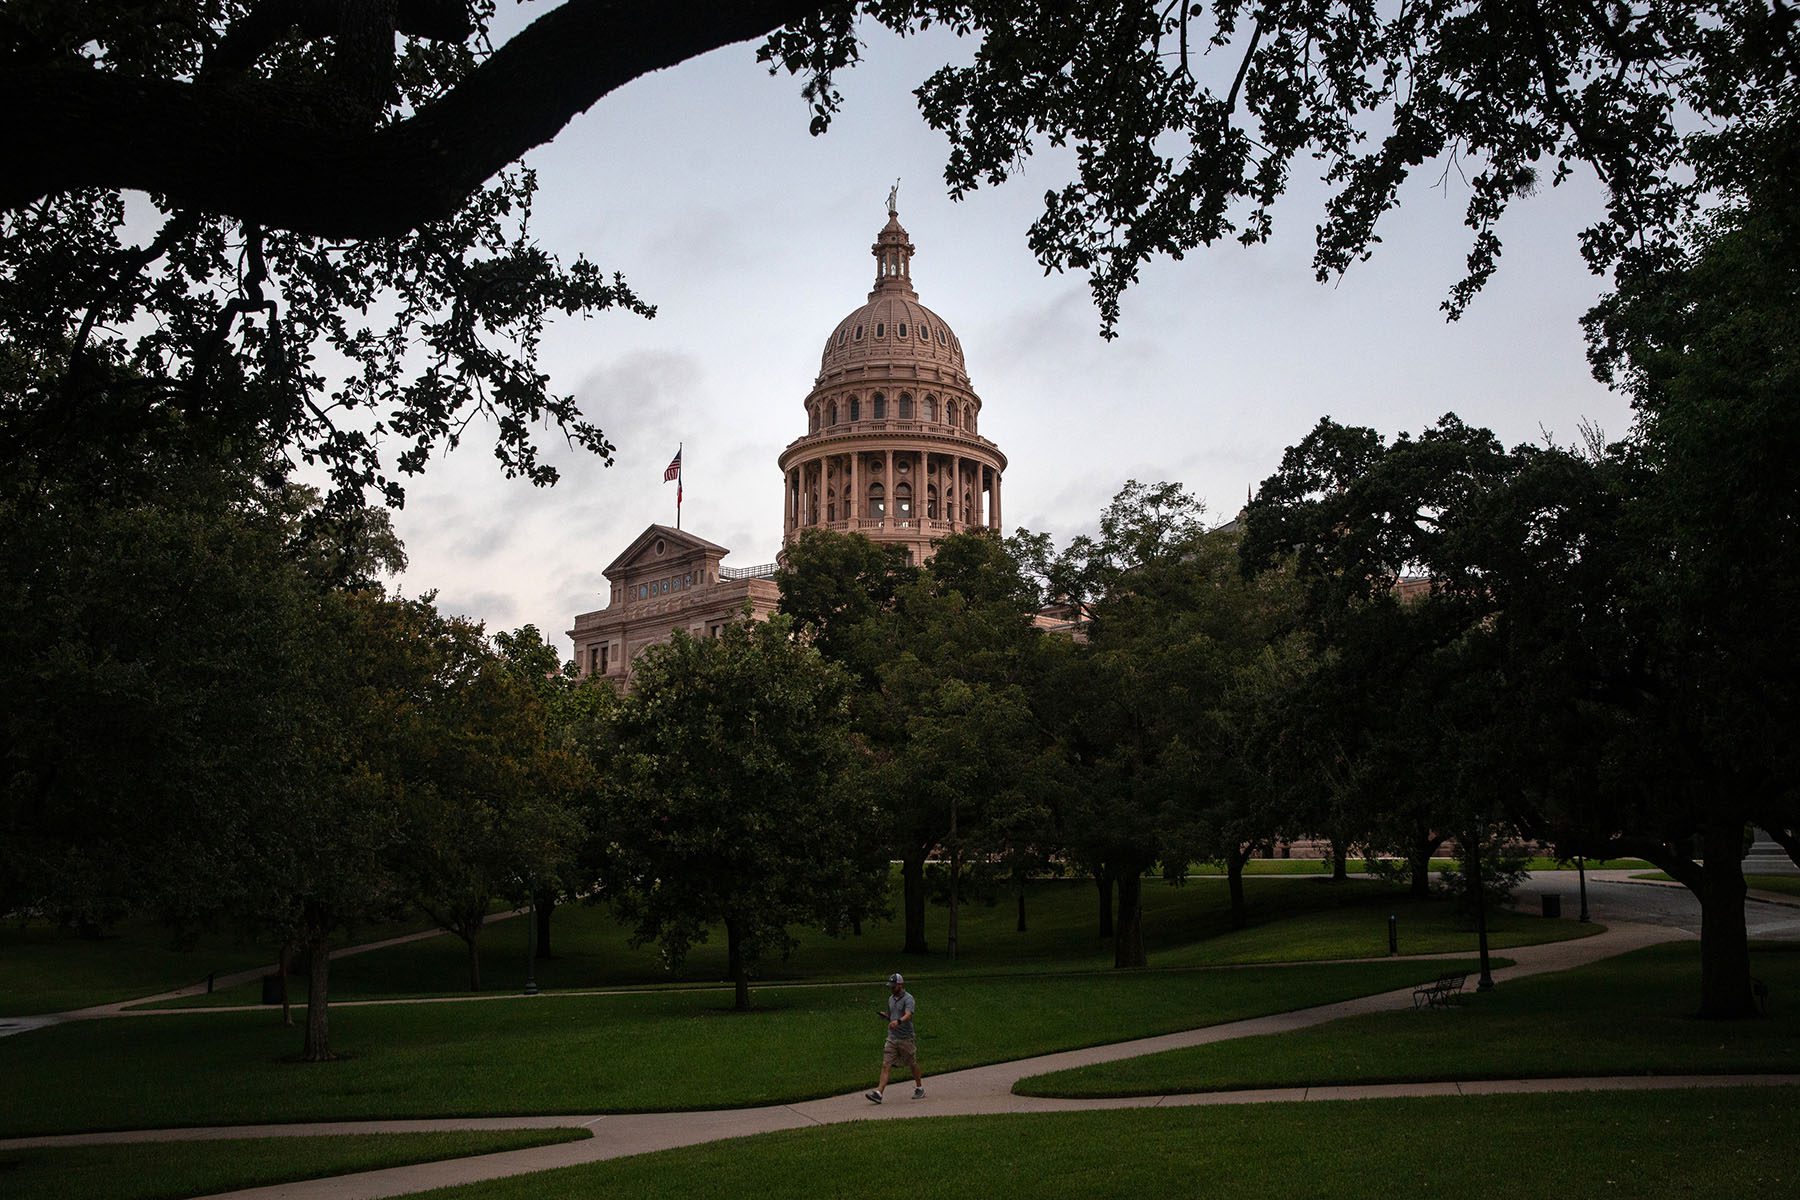 The Texas State Capitol is seen in Austin, Texas.